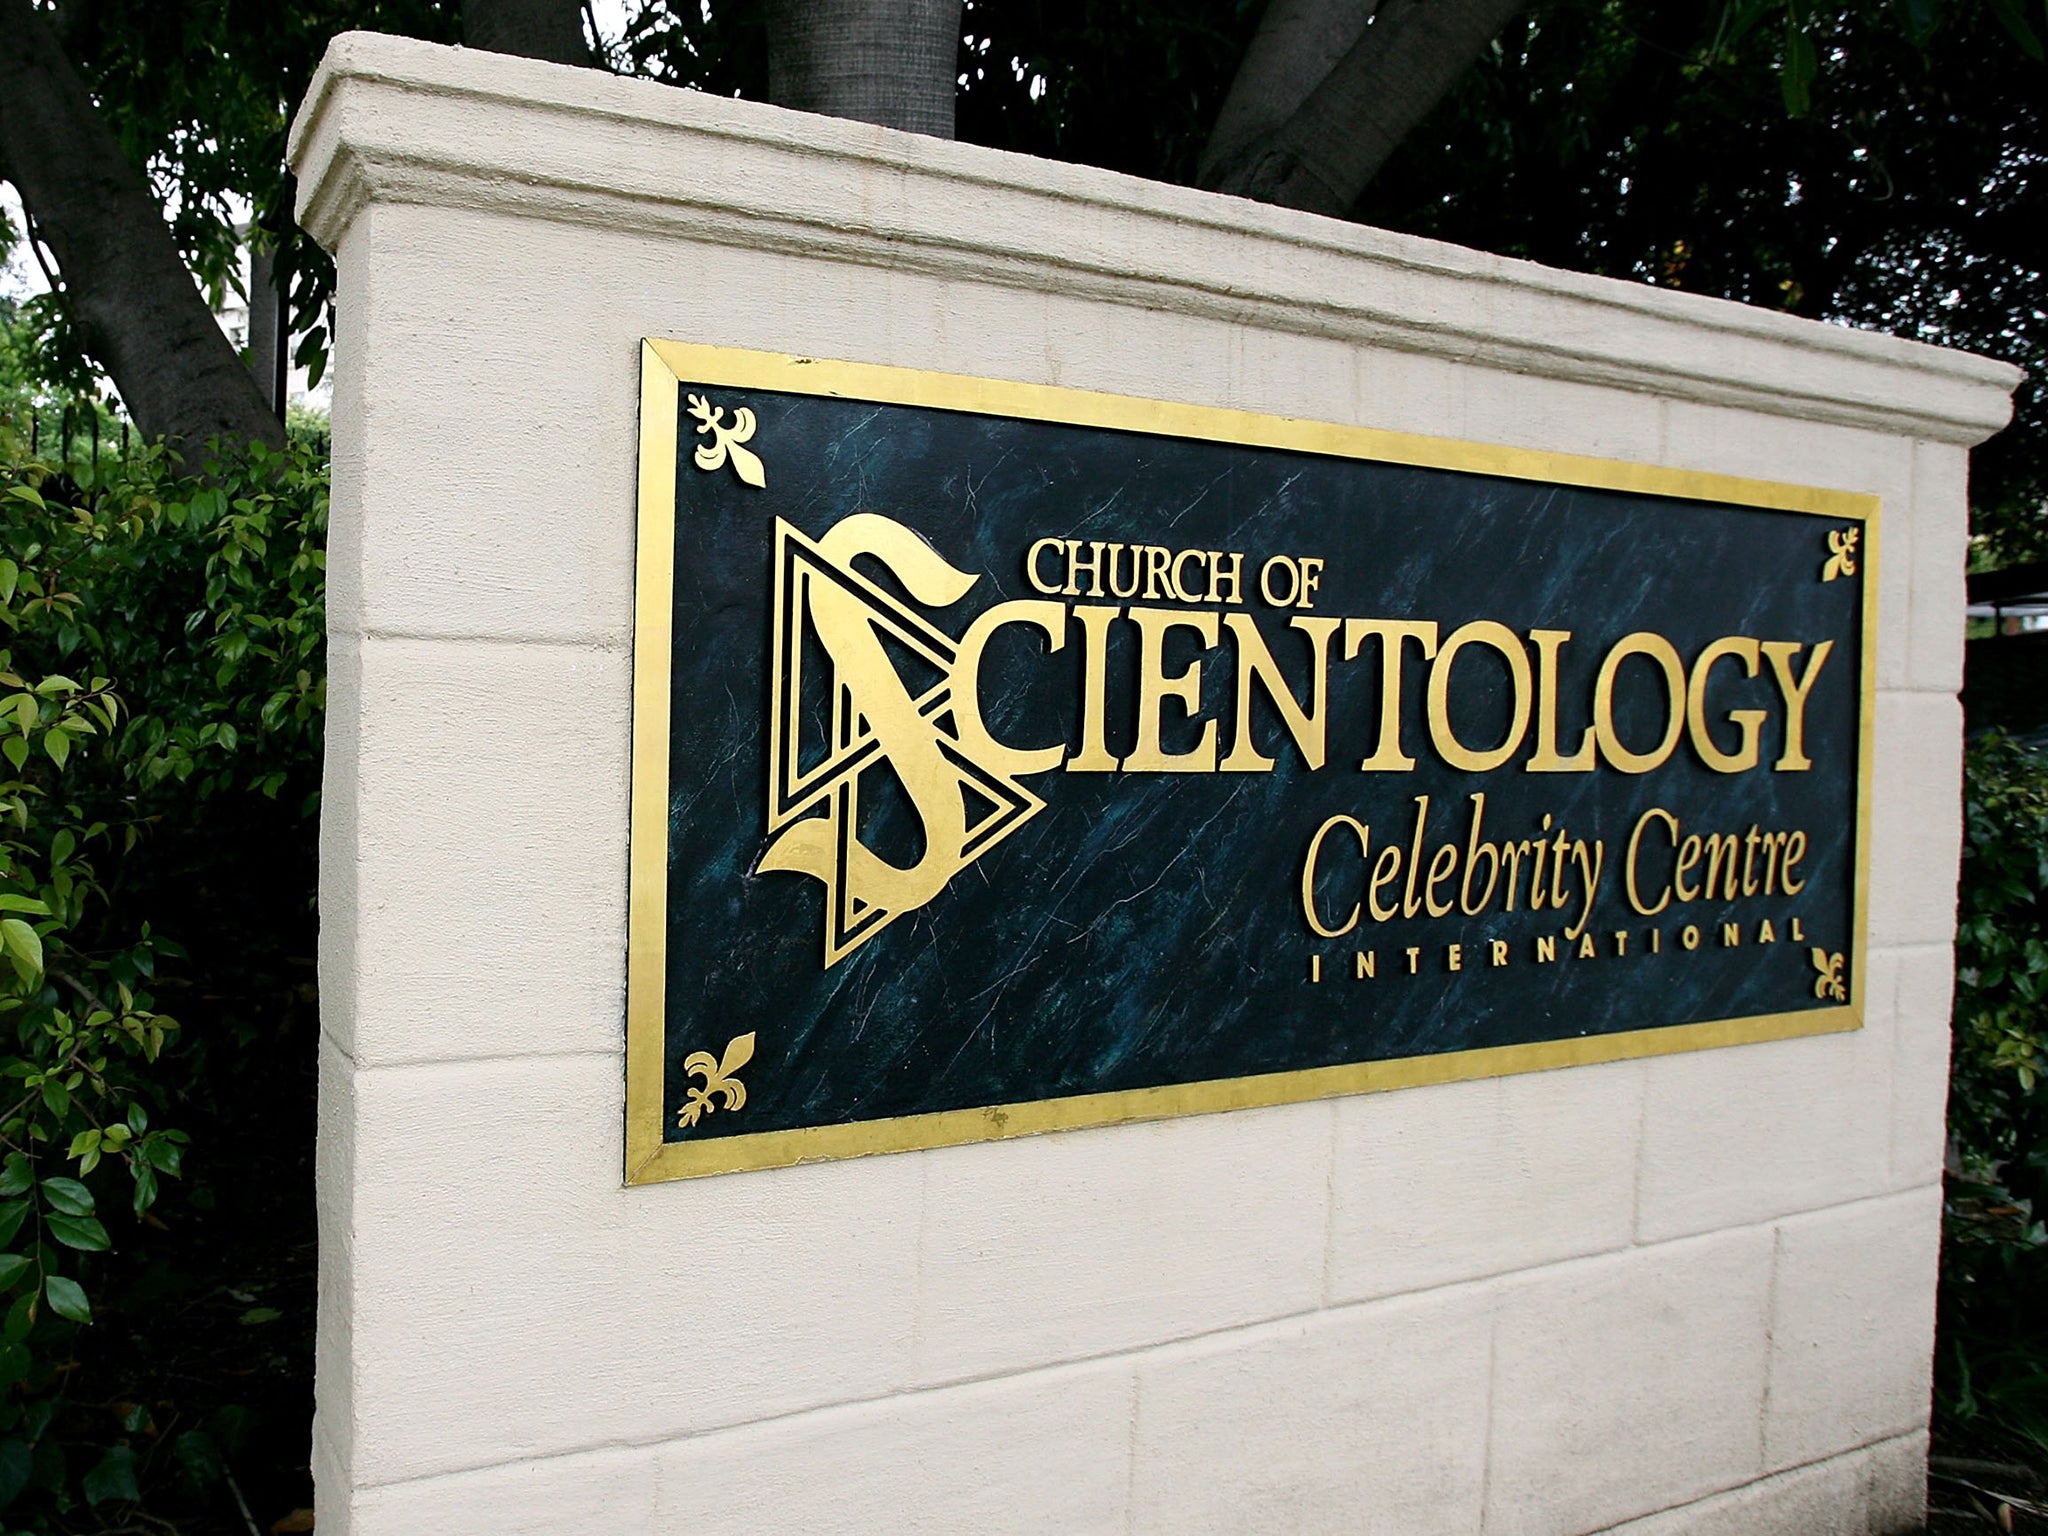 The couple believe their son works at the Church of Scientology's celebrity centre in Los Angeles